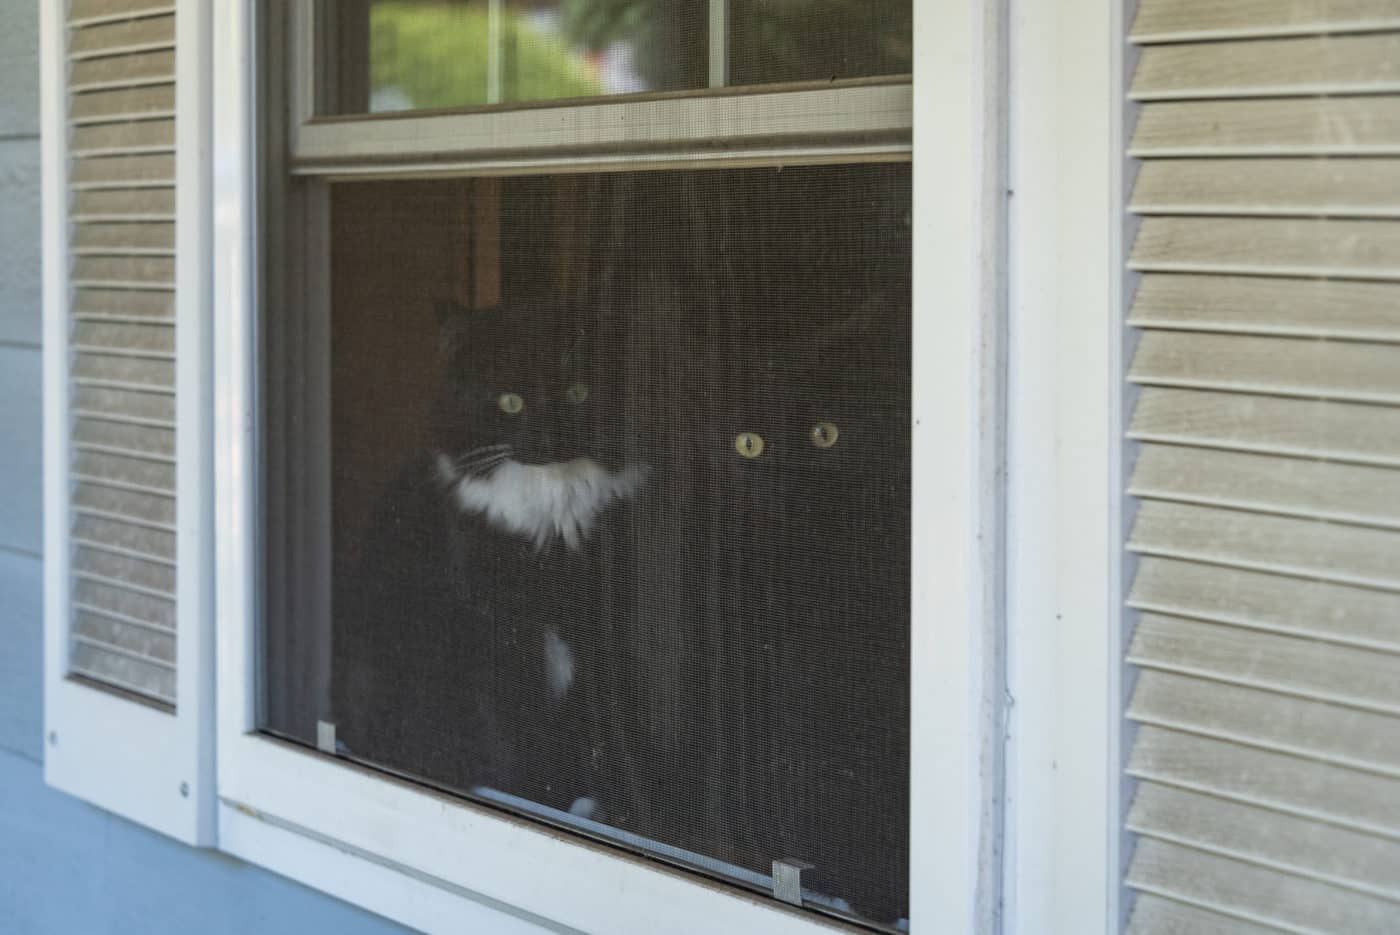 Two black cats looking out of a window with screens.